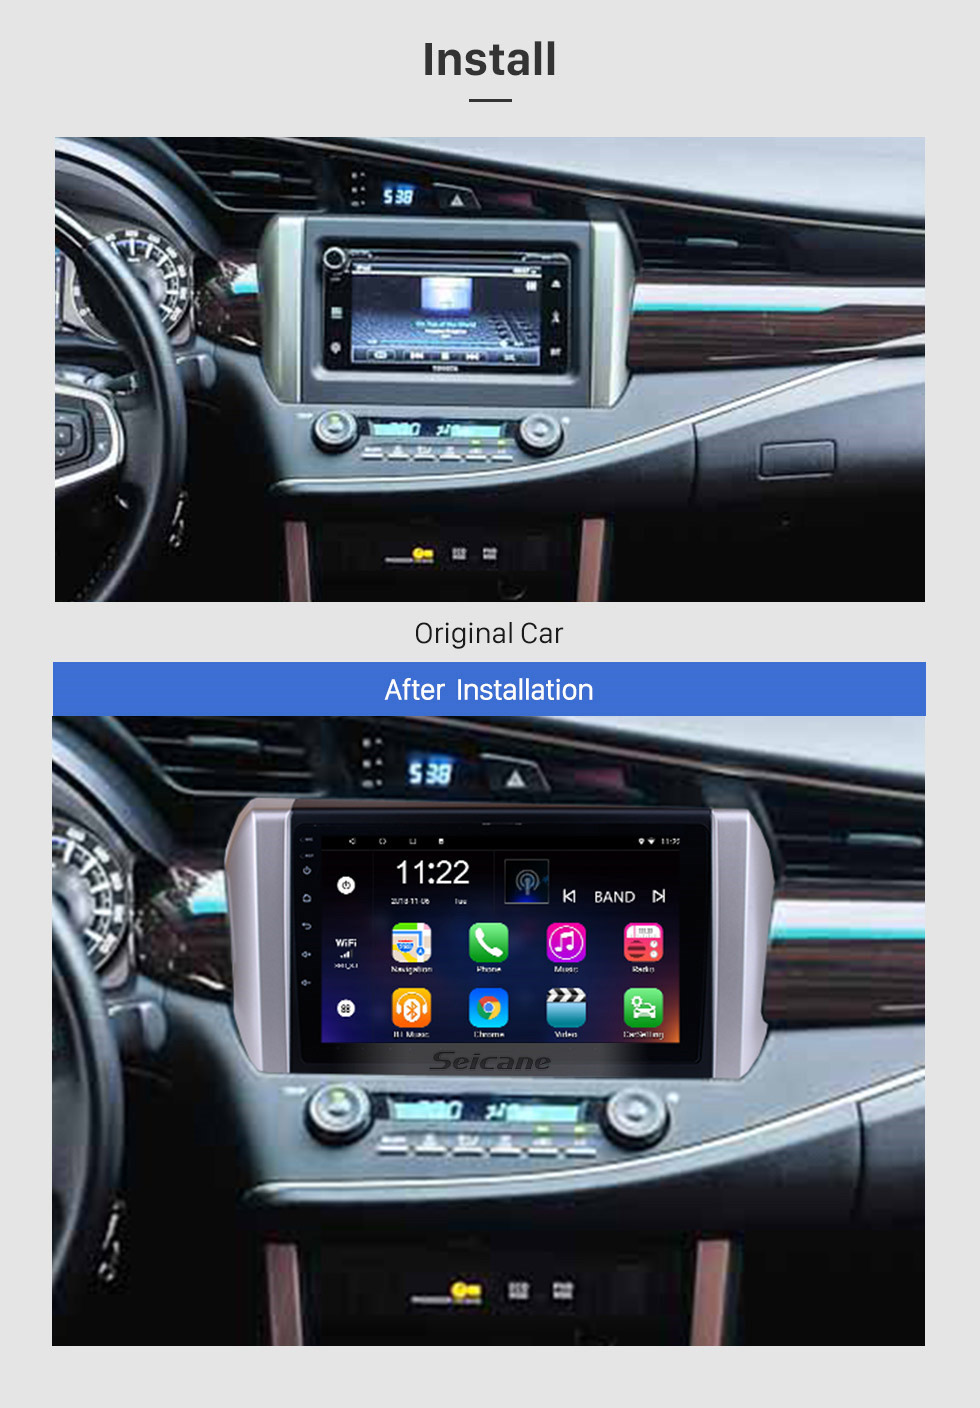 Seicane 9 inch HD Touchscreen Android 8.1 Radio for 2015 Toyota INNOVA left hand driving GPS Navigation SWC Bluetooth USB WIFI Rearview Carplay Video support DVR TPMS